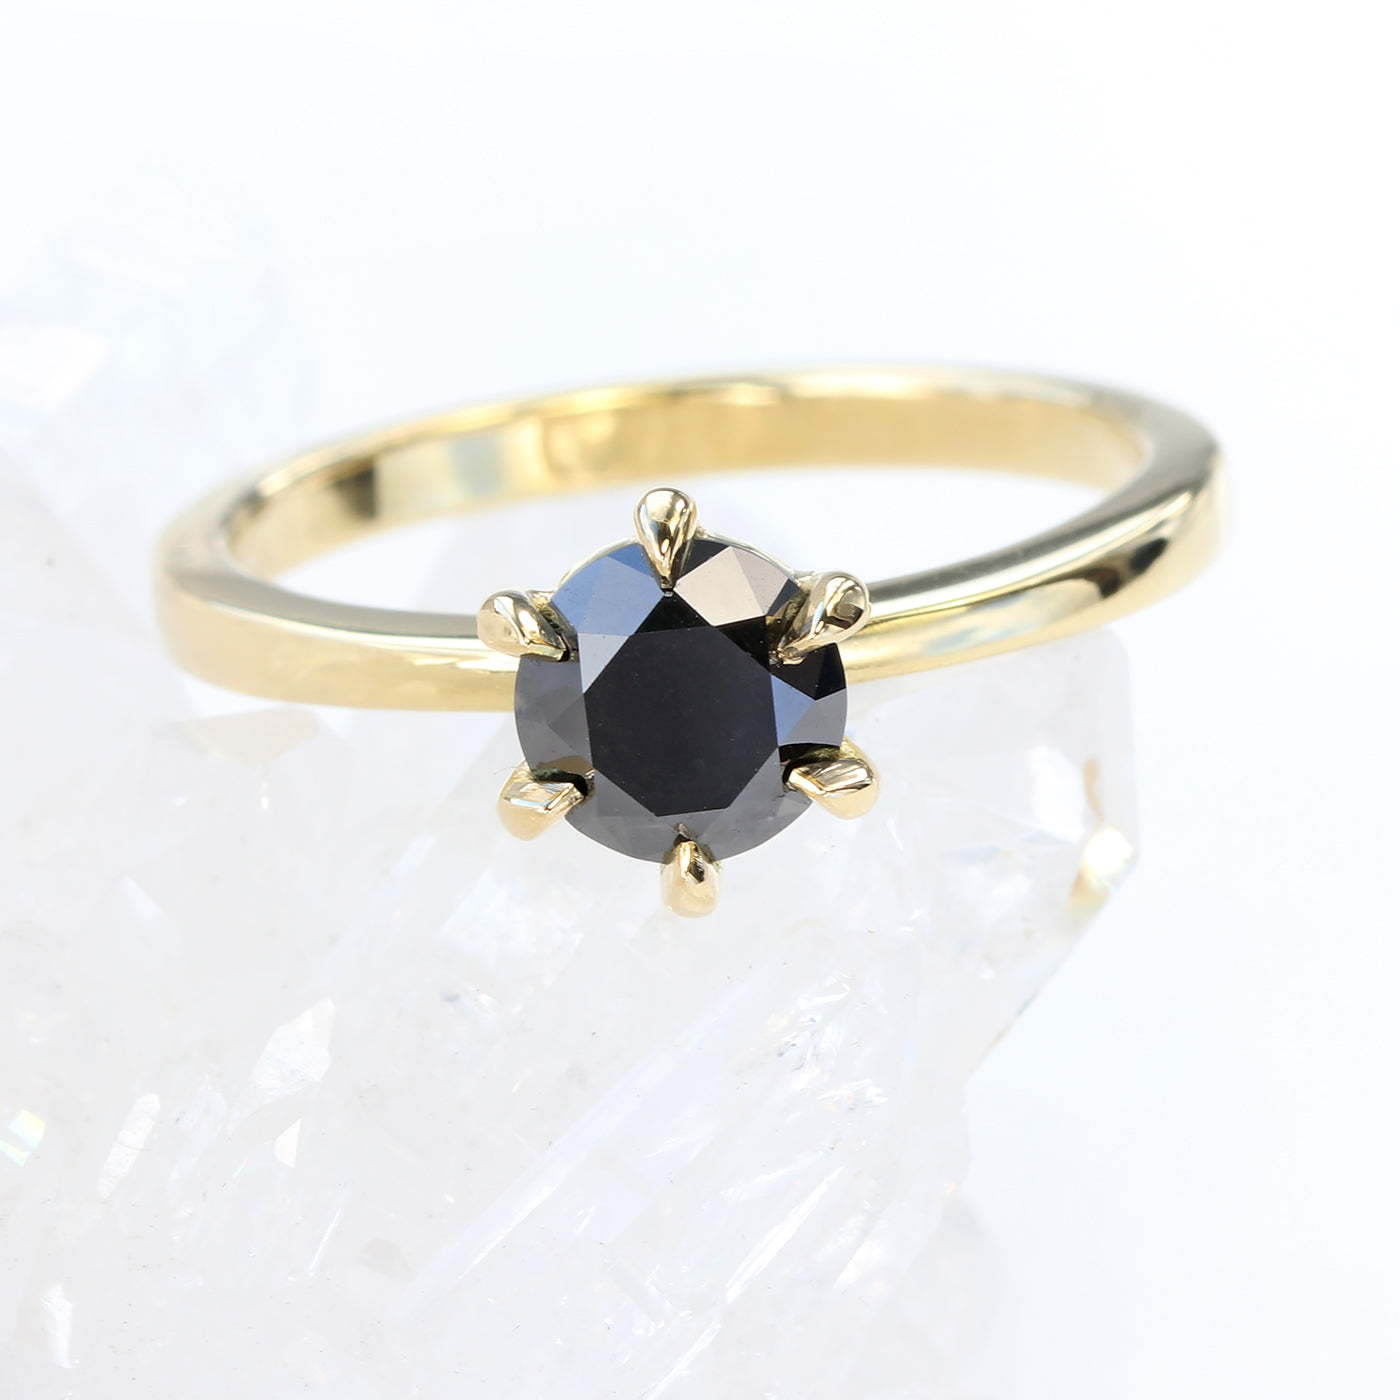 18ct Gold 6-Claw Black Diamond Solitaire Engagement Ring